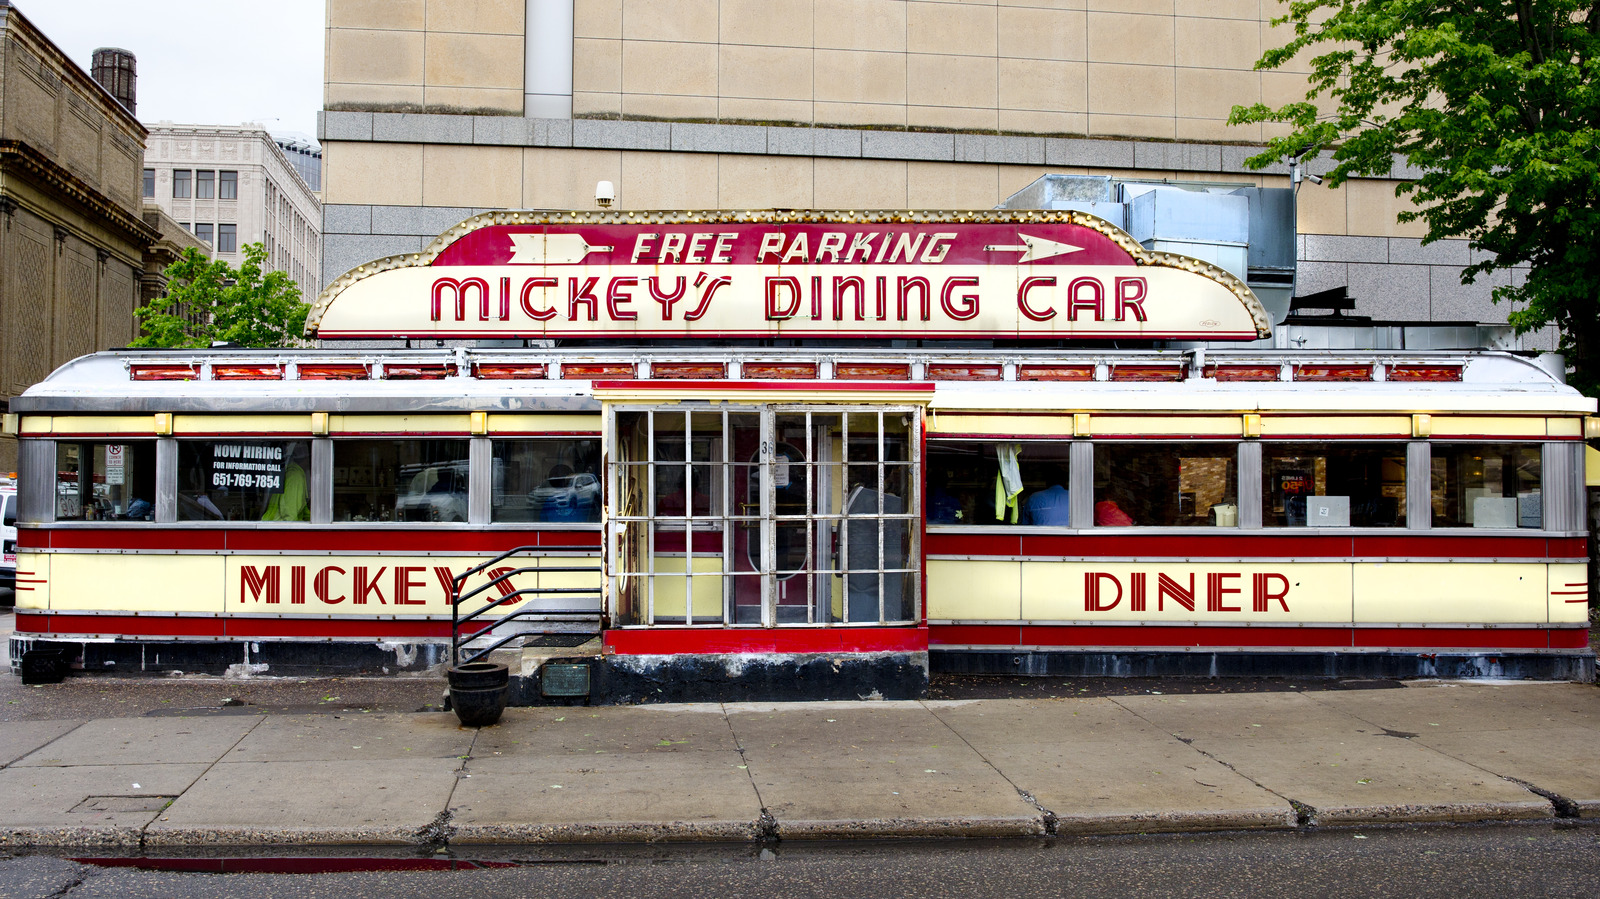 The Surprisingly Practical Reason So Many Old Diners Look Like Train Cars